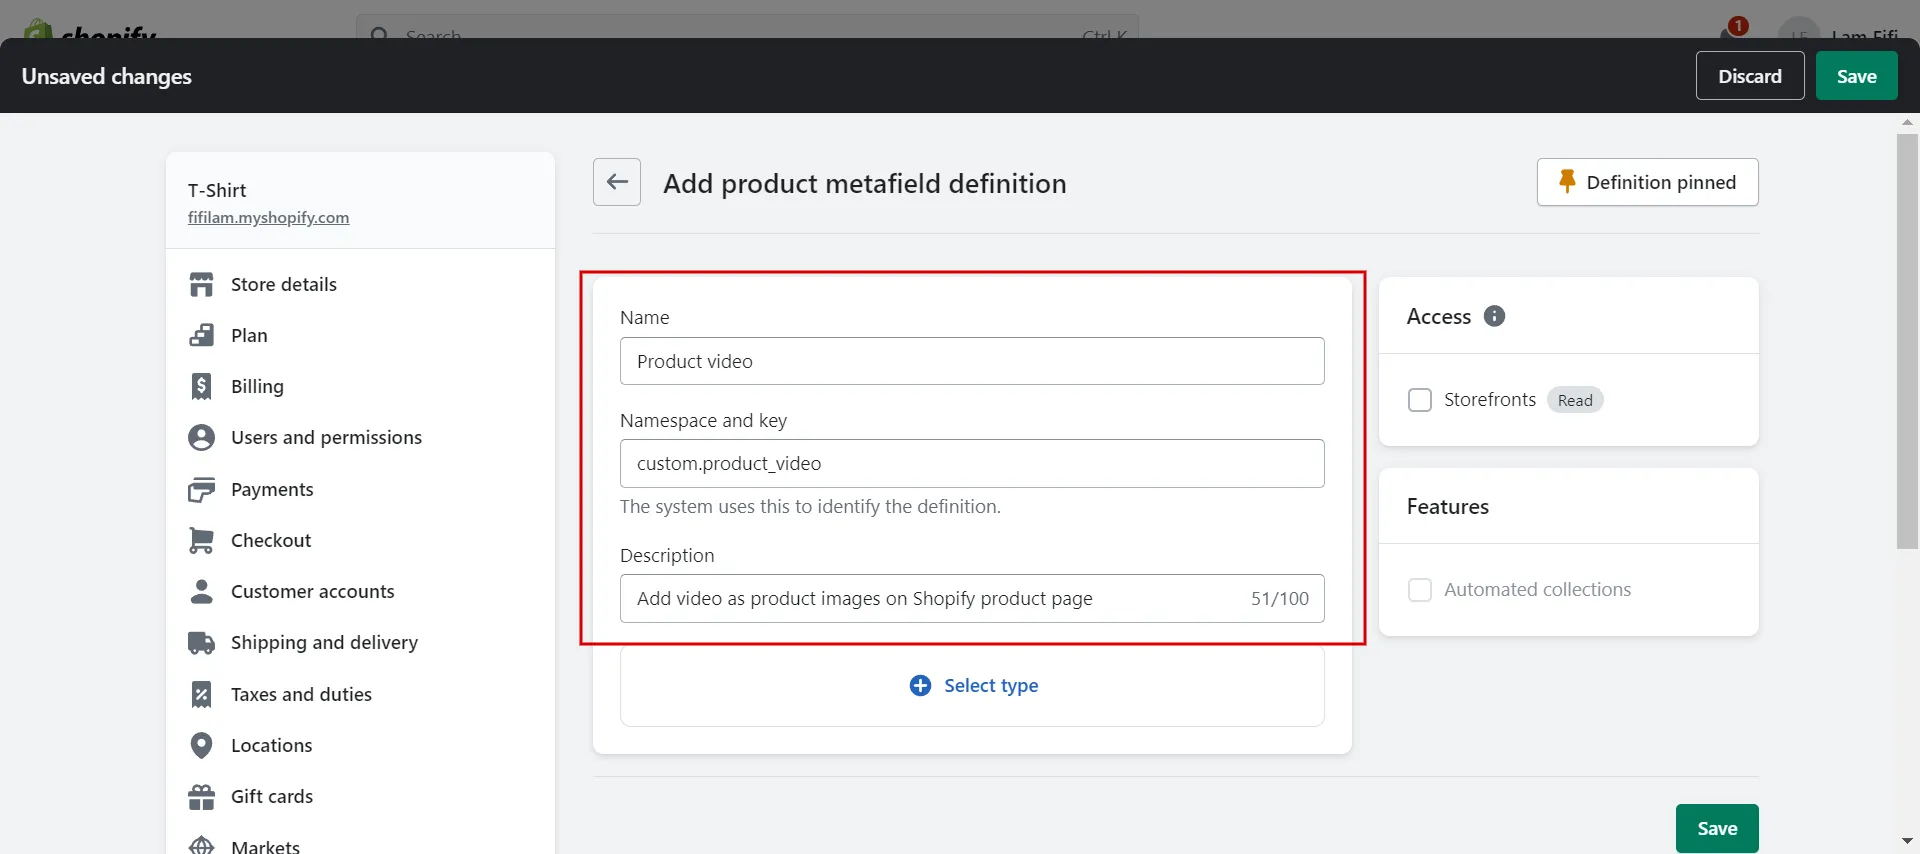 Type the name and description for product meta fields